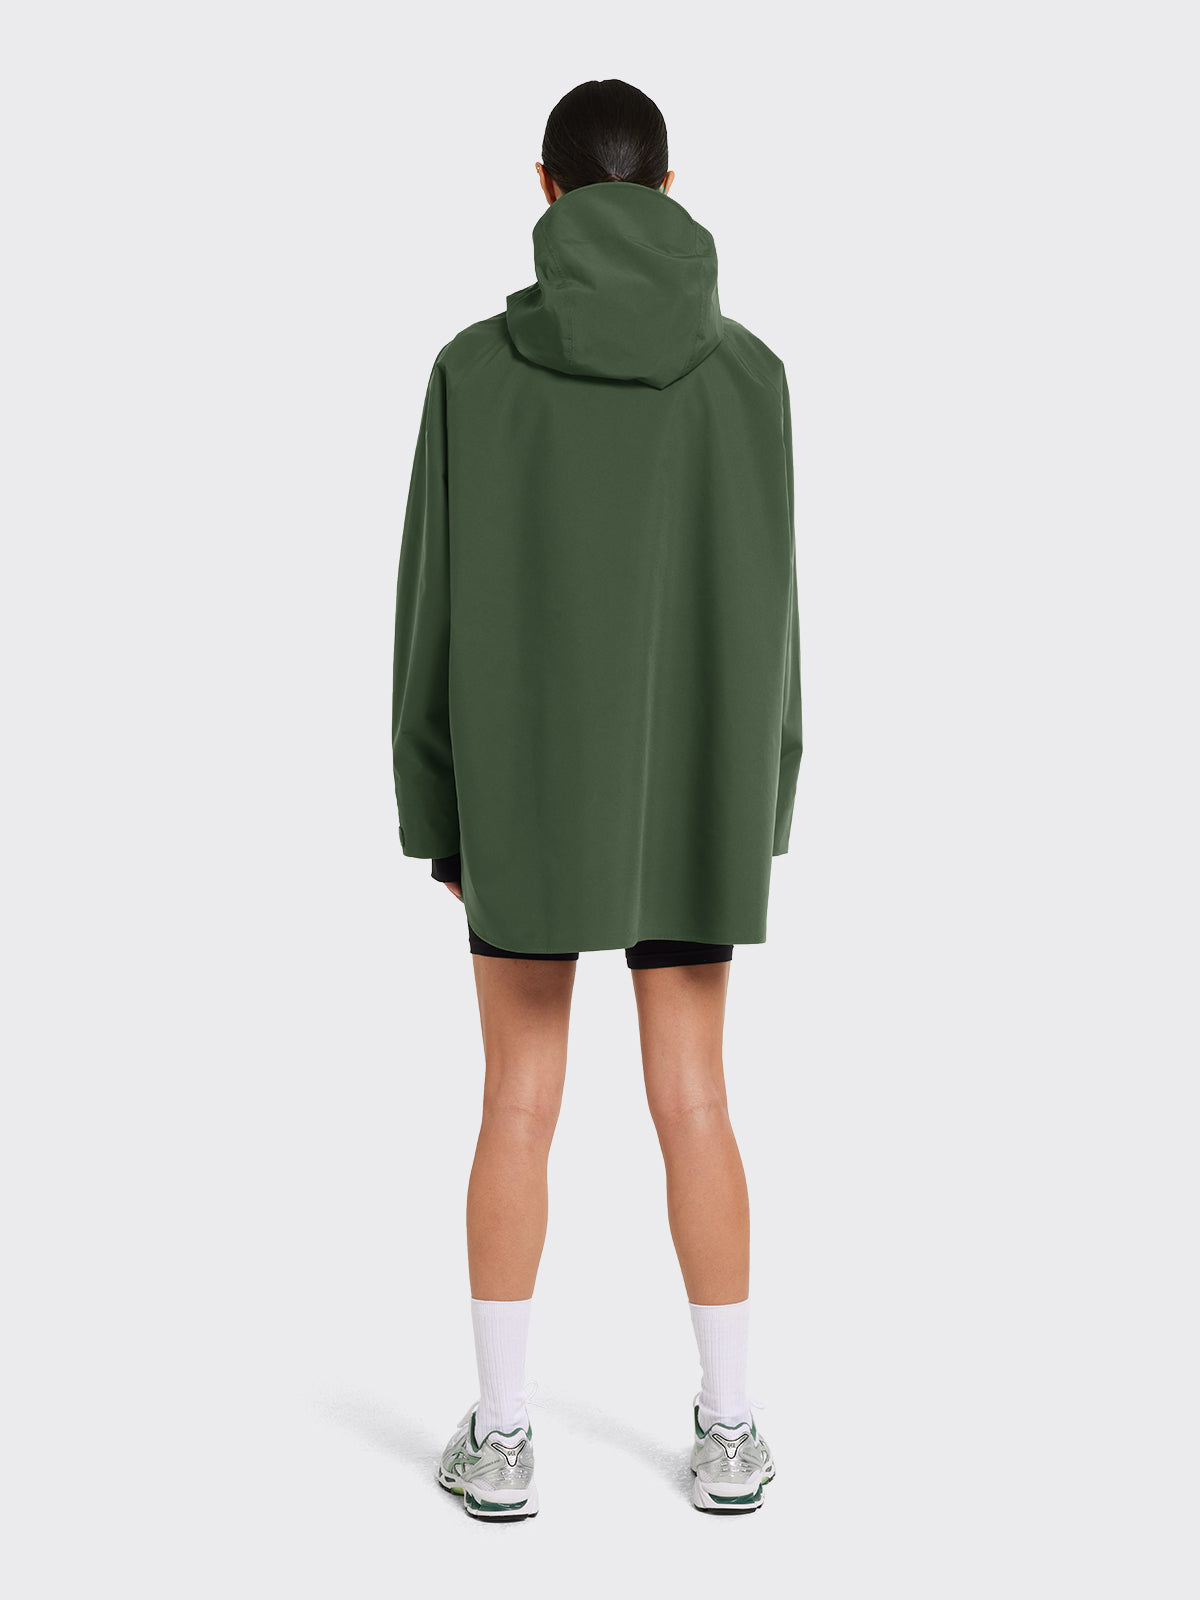 Woman in Voss poncho in Dusty Green by Blæst